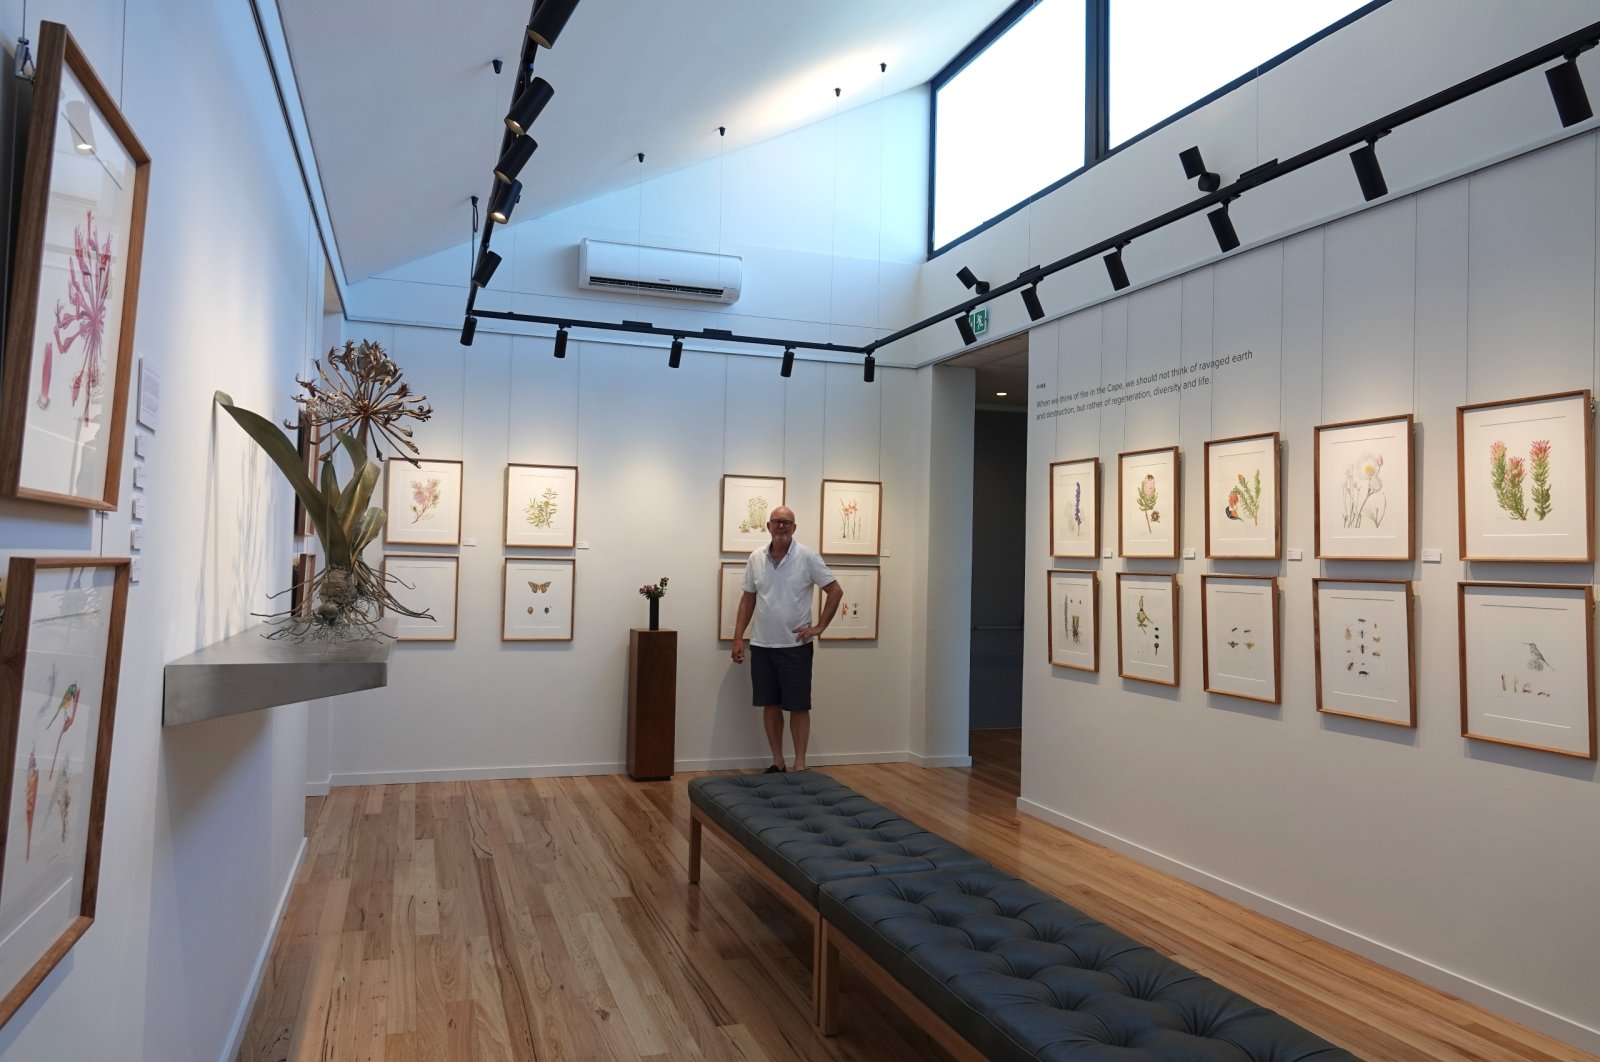 Michael Lutzeyer with illustrations of rare, endangered and endemic plant species, which he exhibits in an art gallery on his private nature reserve Grootbos, Cape Town, South Africa, Oct. 20, 2022. (dpa Photo)